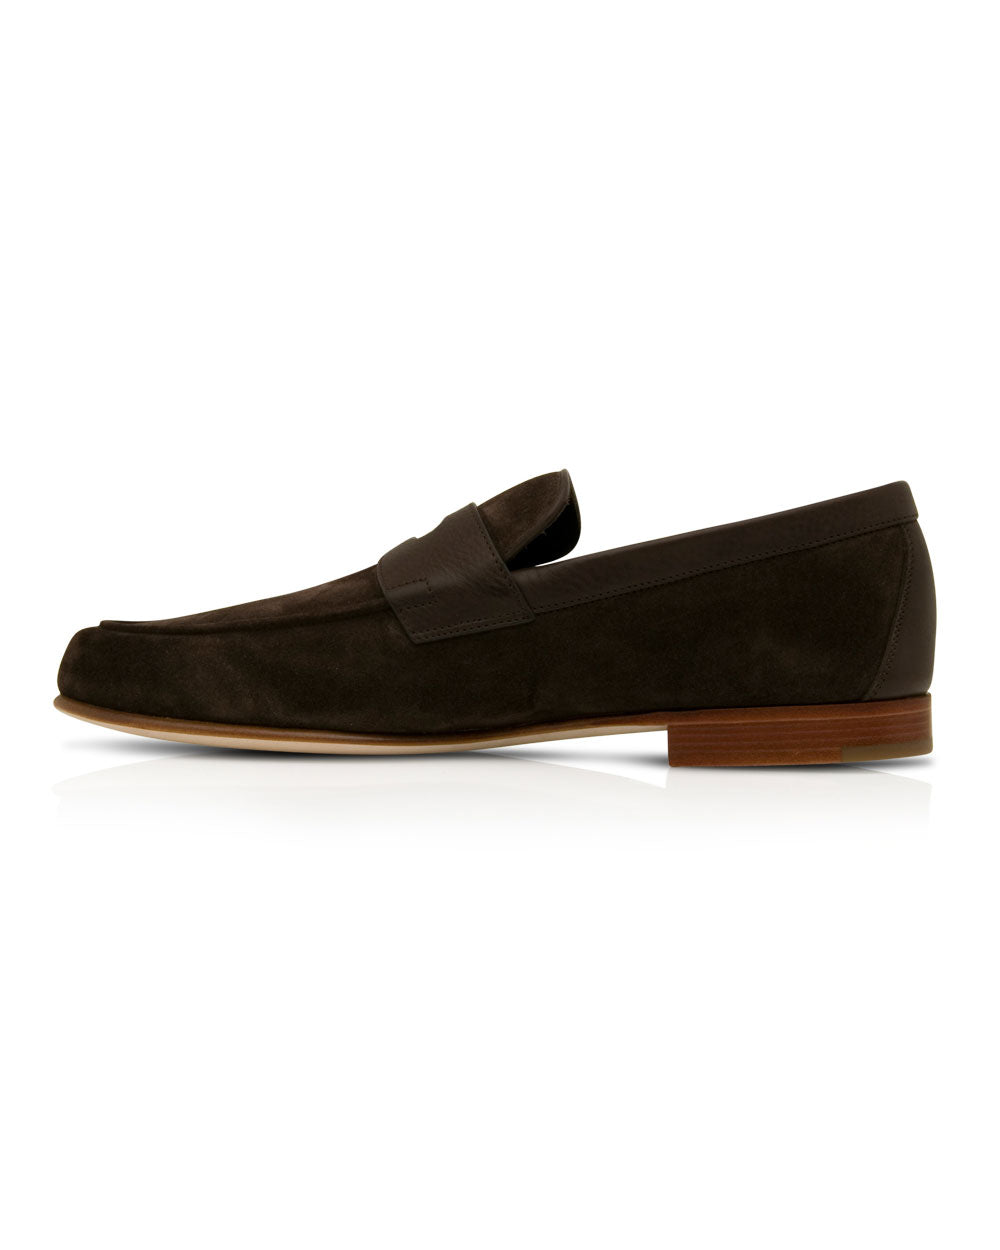 Hendra Suede Penny Loafer in Brown